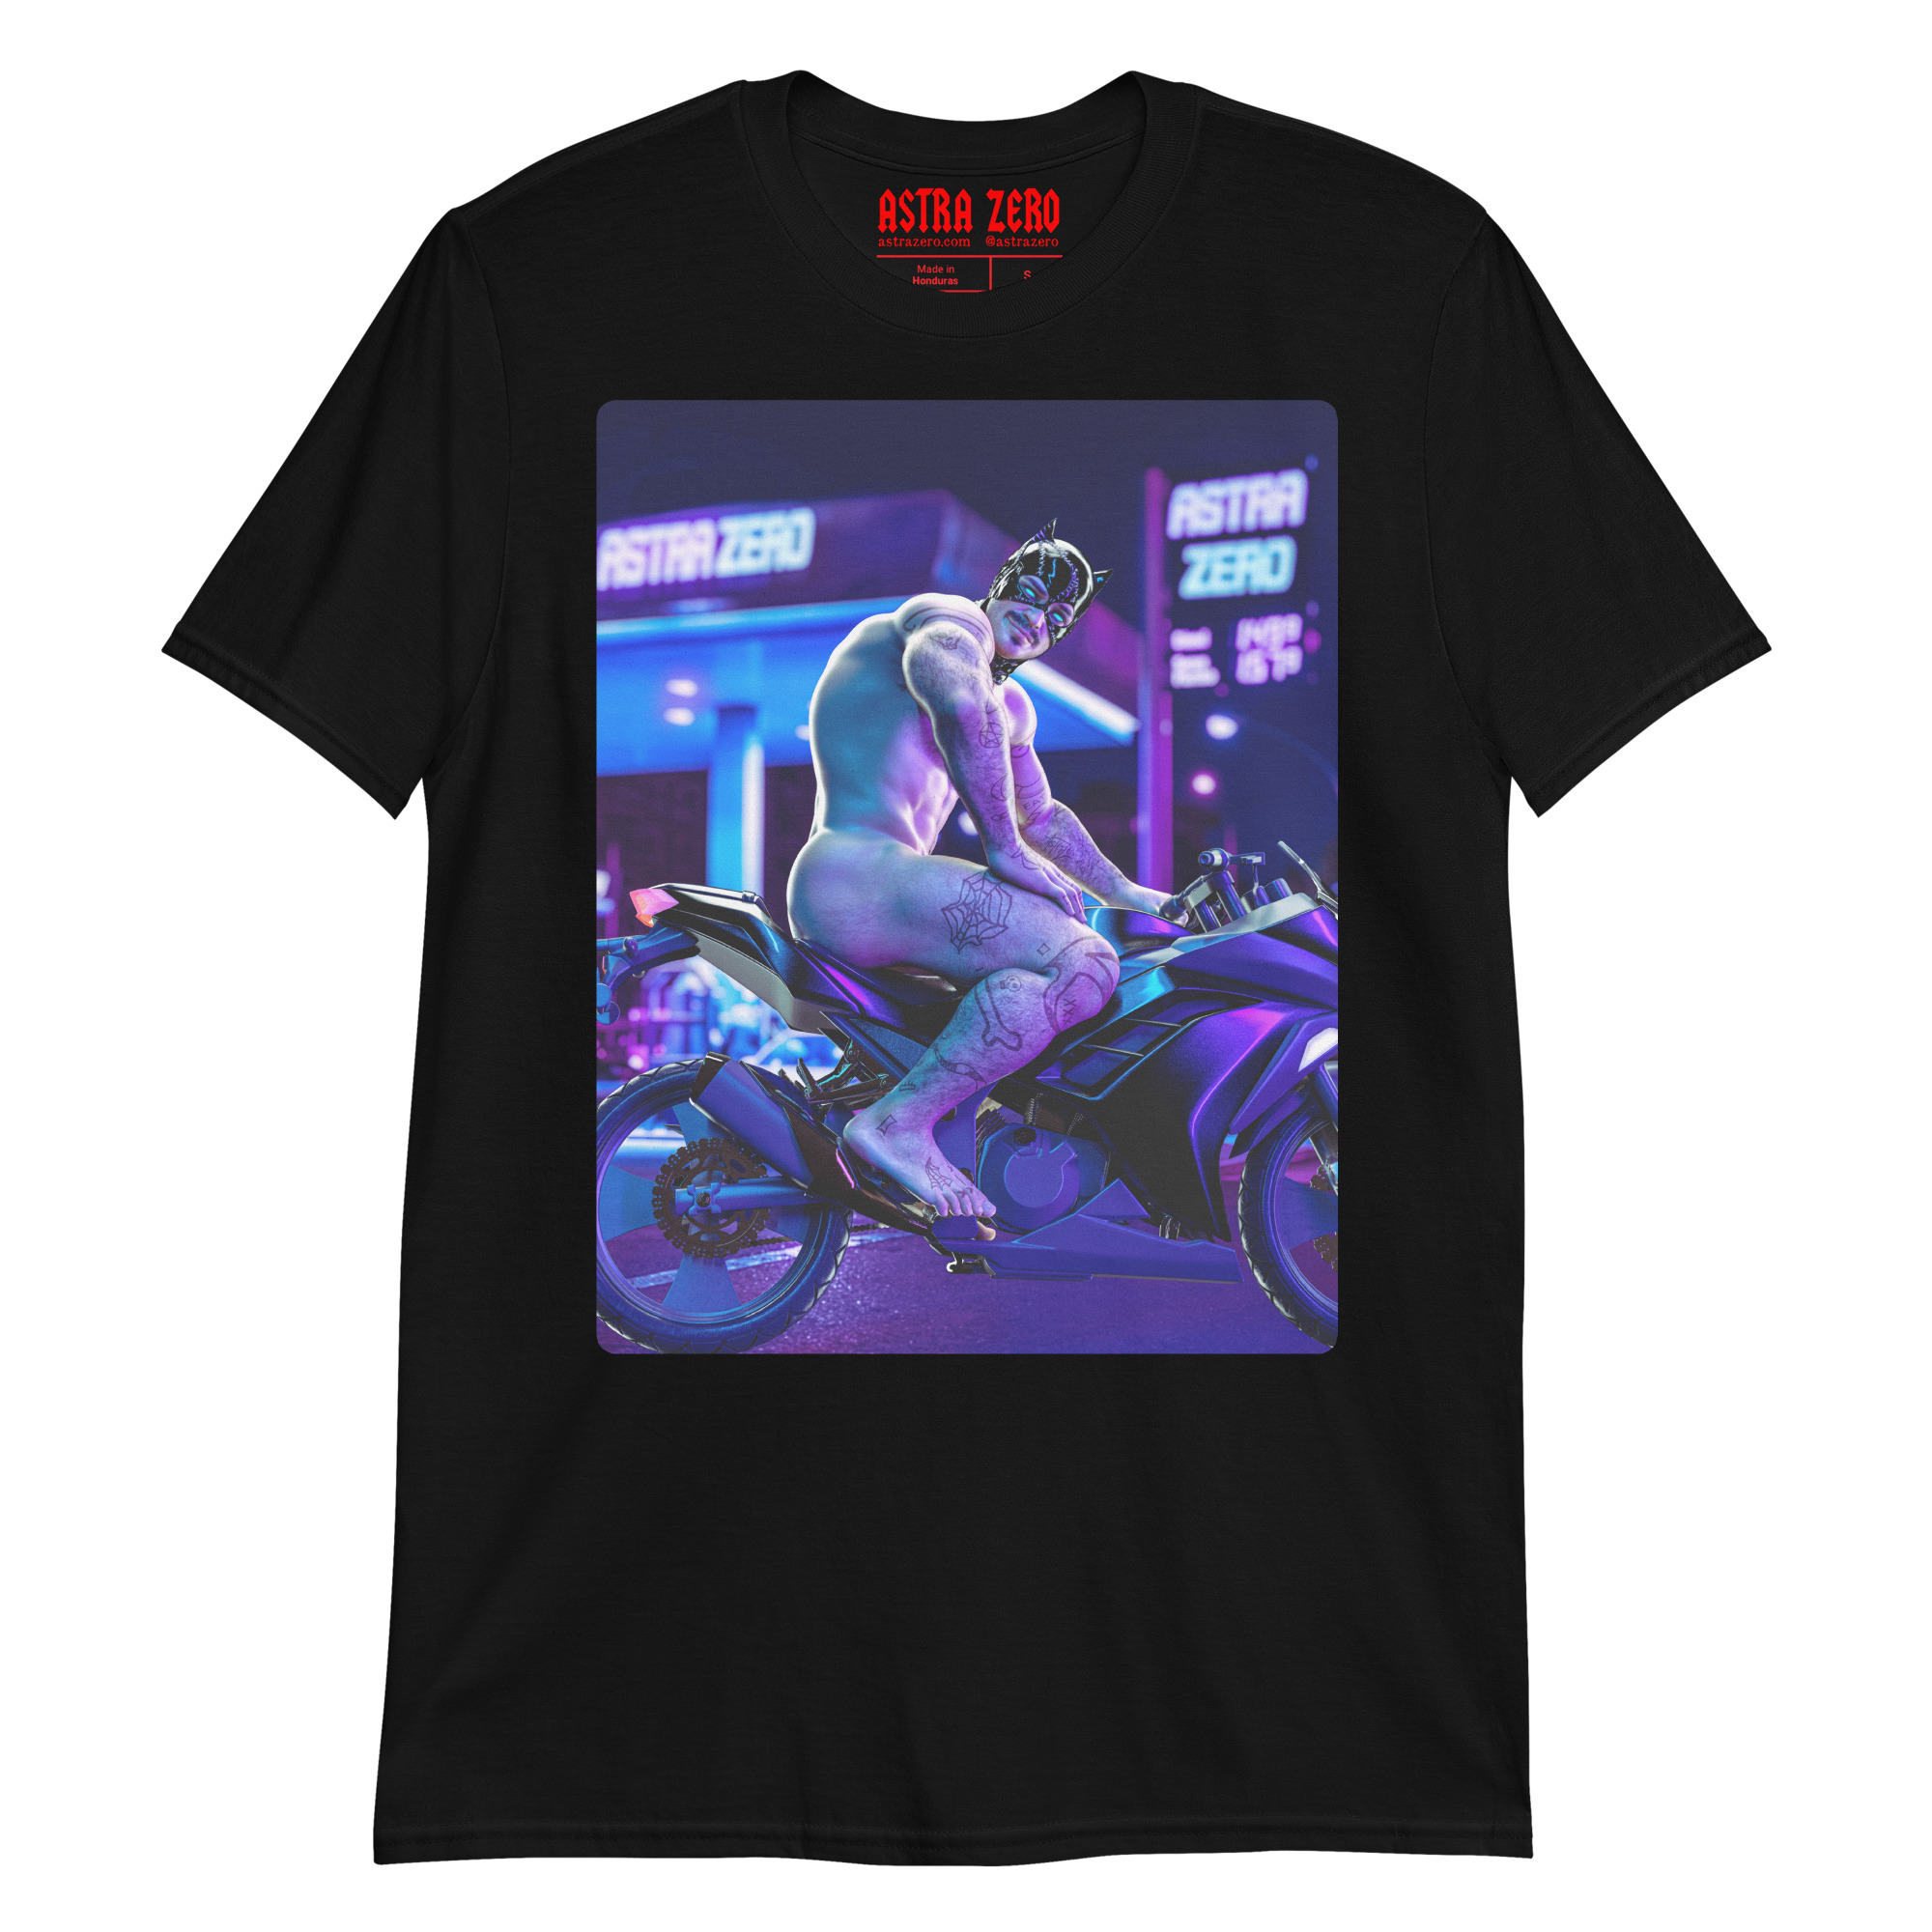 Featured image for “Need a ride? Short-Sleeve Unisex T-Shirt”